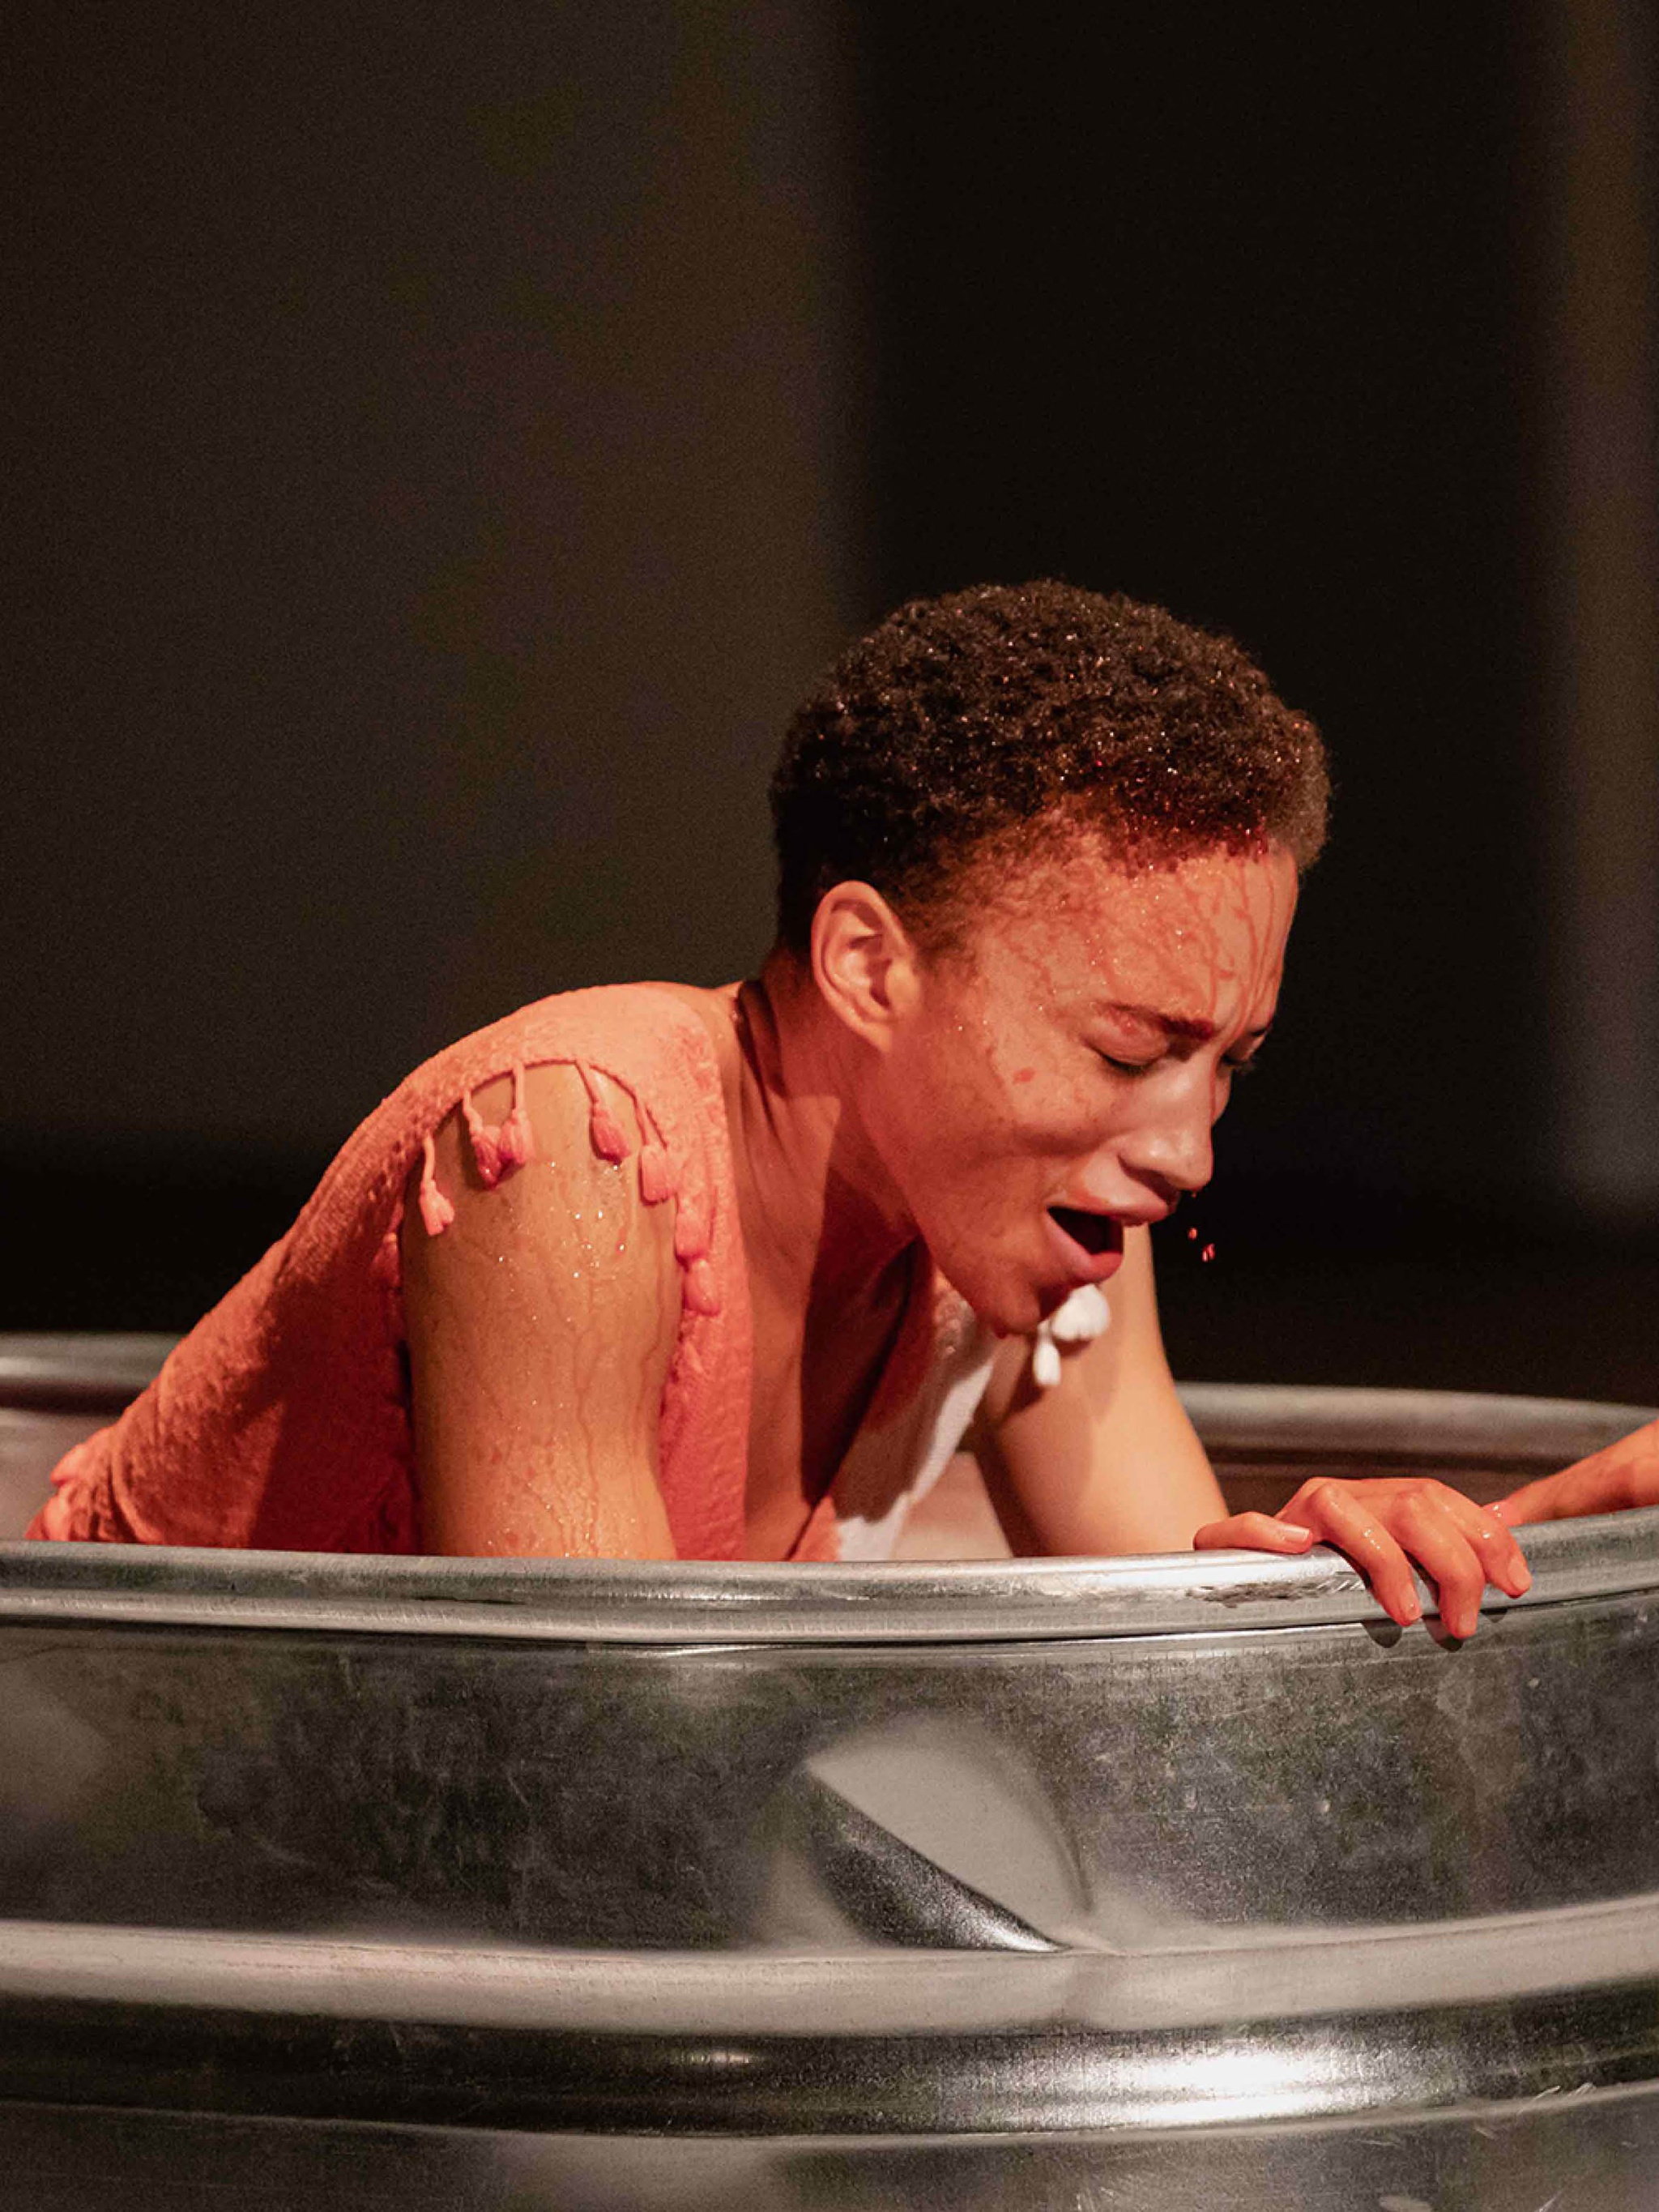 The artist Asia Stewart rises from the red water inside a metal wash tub, gasping for breath with eyes closed. The red liquid pearls in her hair and runs in rivulets down her face, dying the sleeveless white dress she wears red.